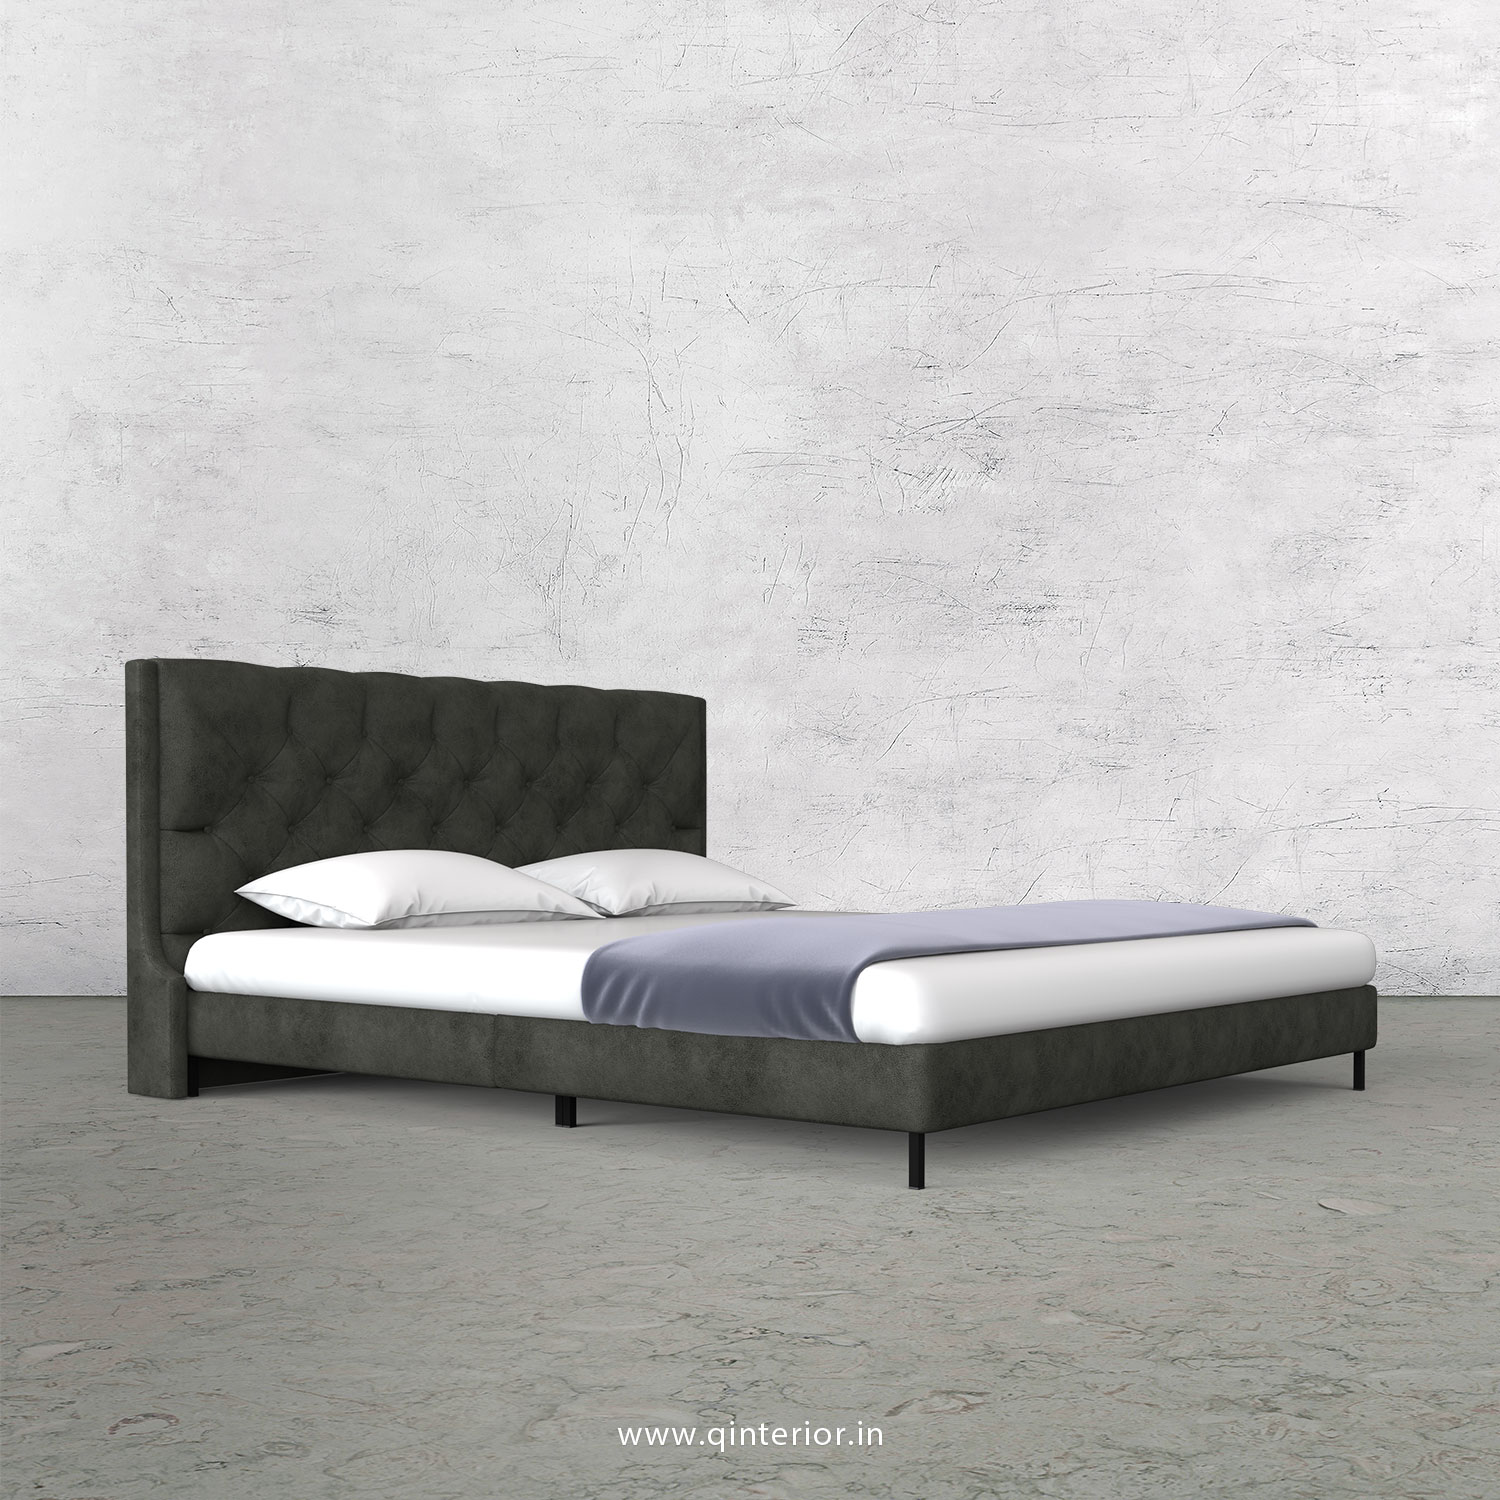 Scorpius Queen Size Bed with Fab Leather Fabric - QBD003 FL07